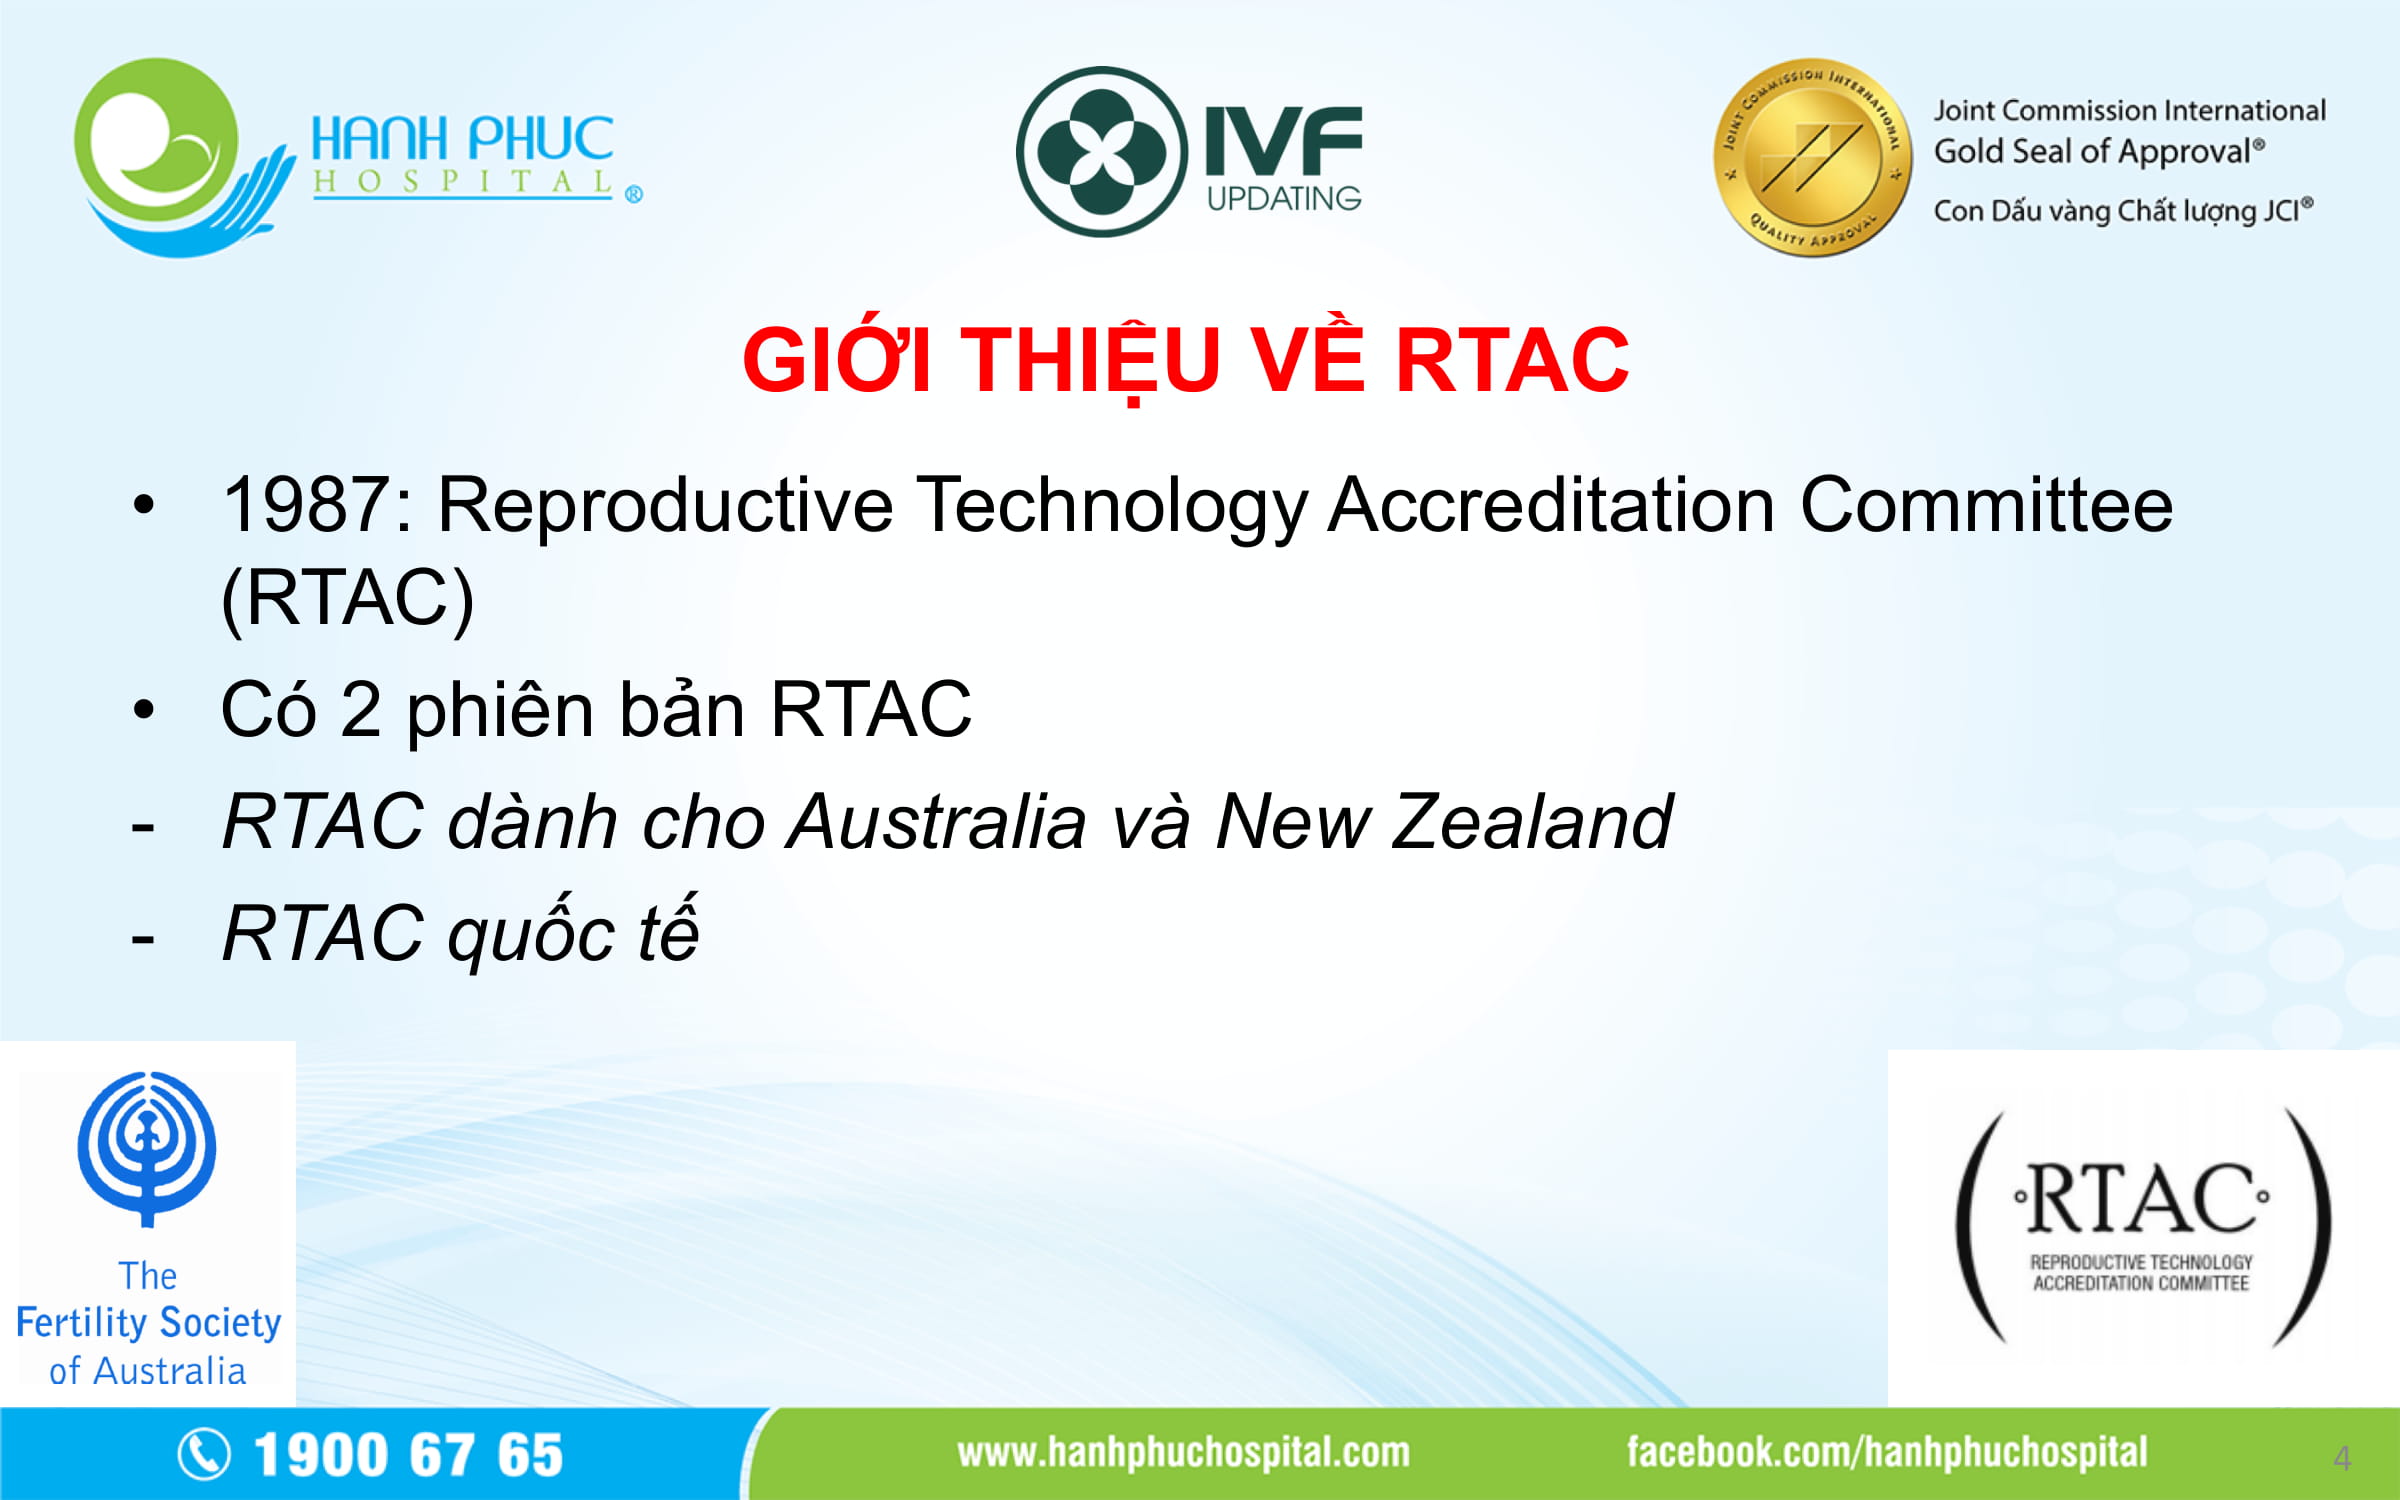 BS Vo Thien An Report_IVF UPDATING 5-04